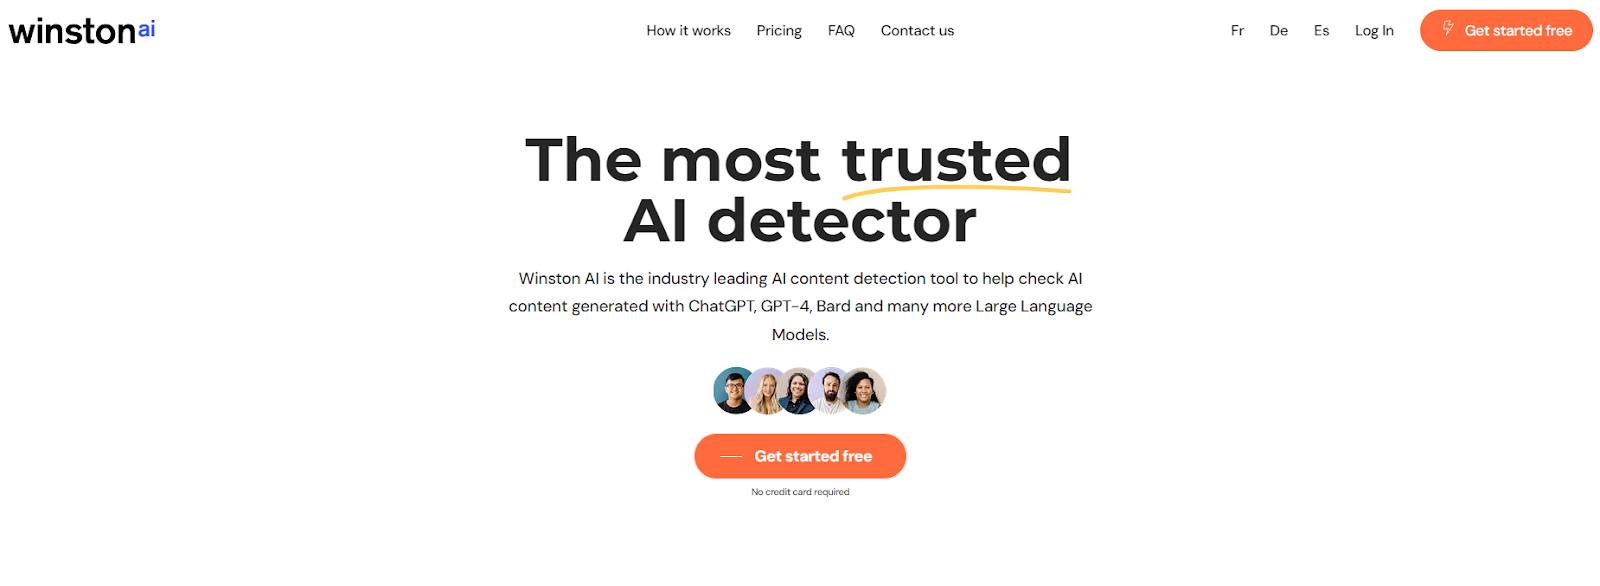 The homepage for Winston AI.